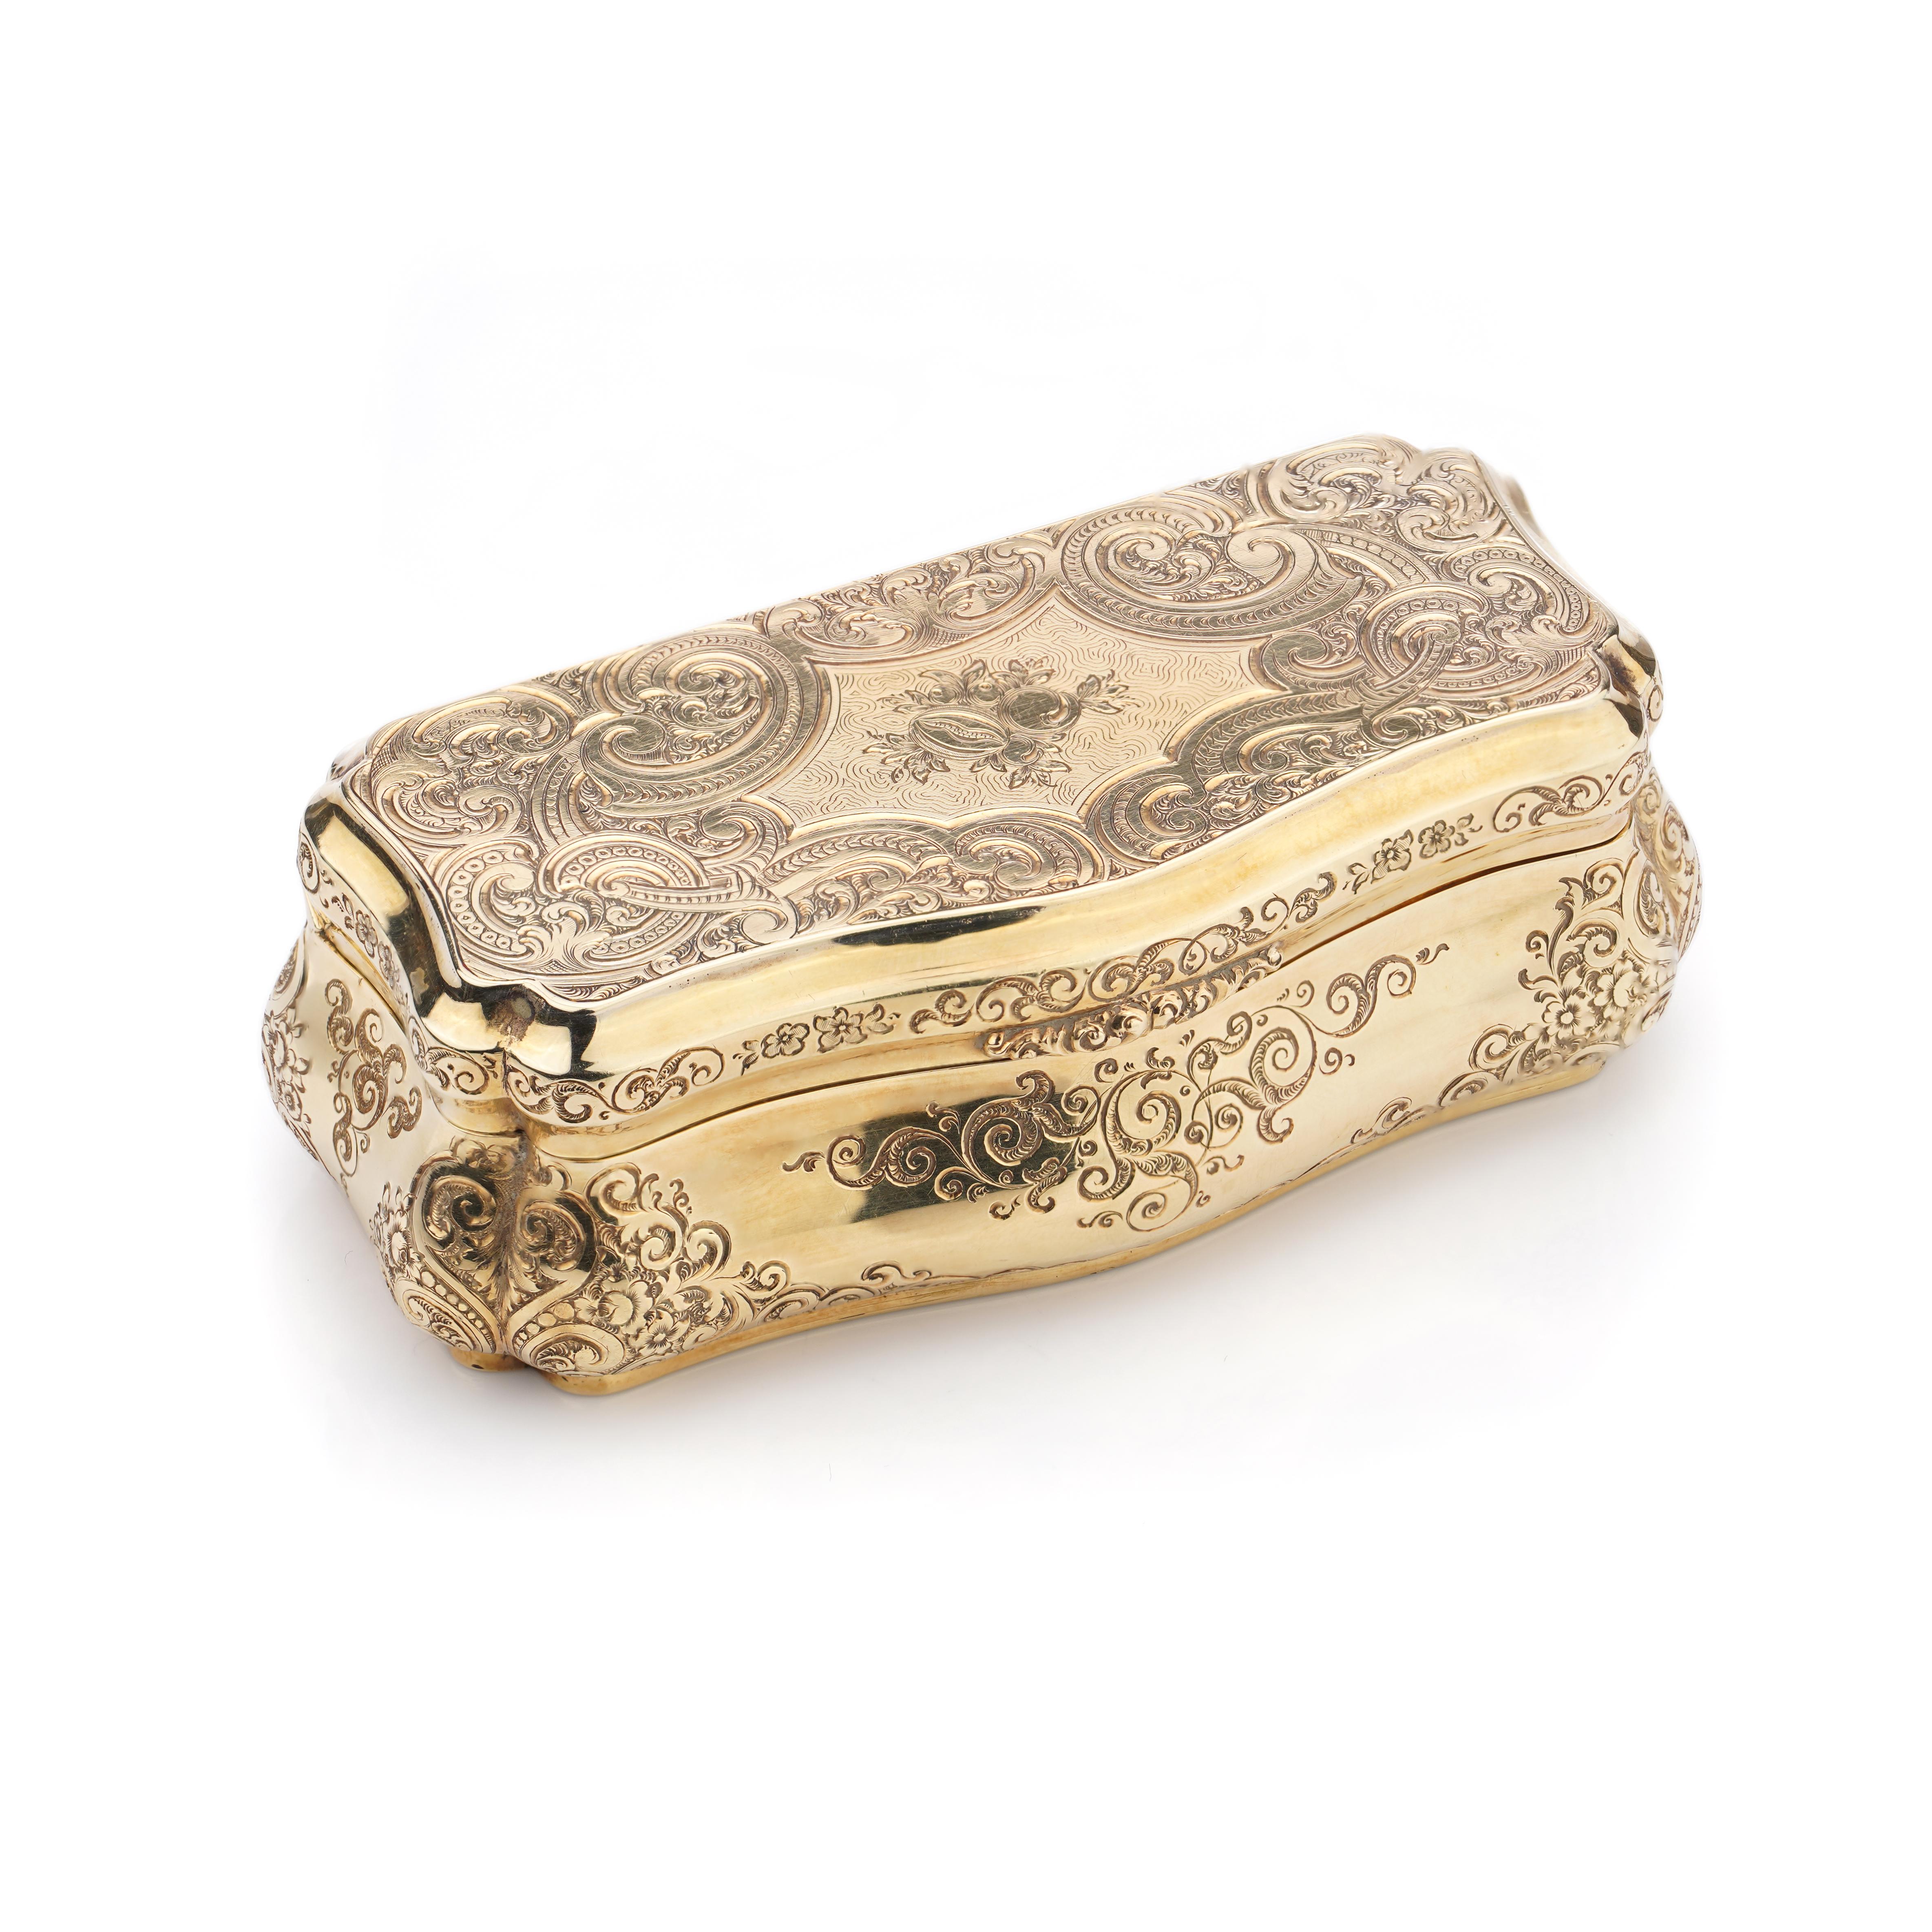 Antique German 14kt. yellow gold snuff - box by Carl Martin Weishaupt & Sons. 
Made in Germany, (fl. c. 1837 - after 1870)
Maker: Carl Martin Weishaupt & Sons 
Hallmarked with Hanau marks, the town mark, circa 1850, with a 14-carat gold mark. 

The